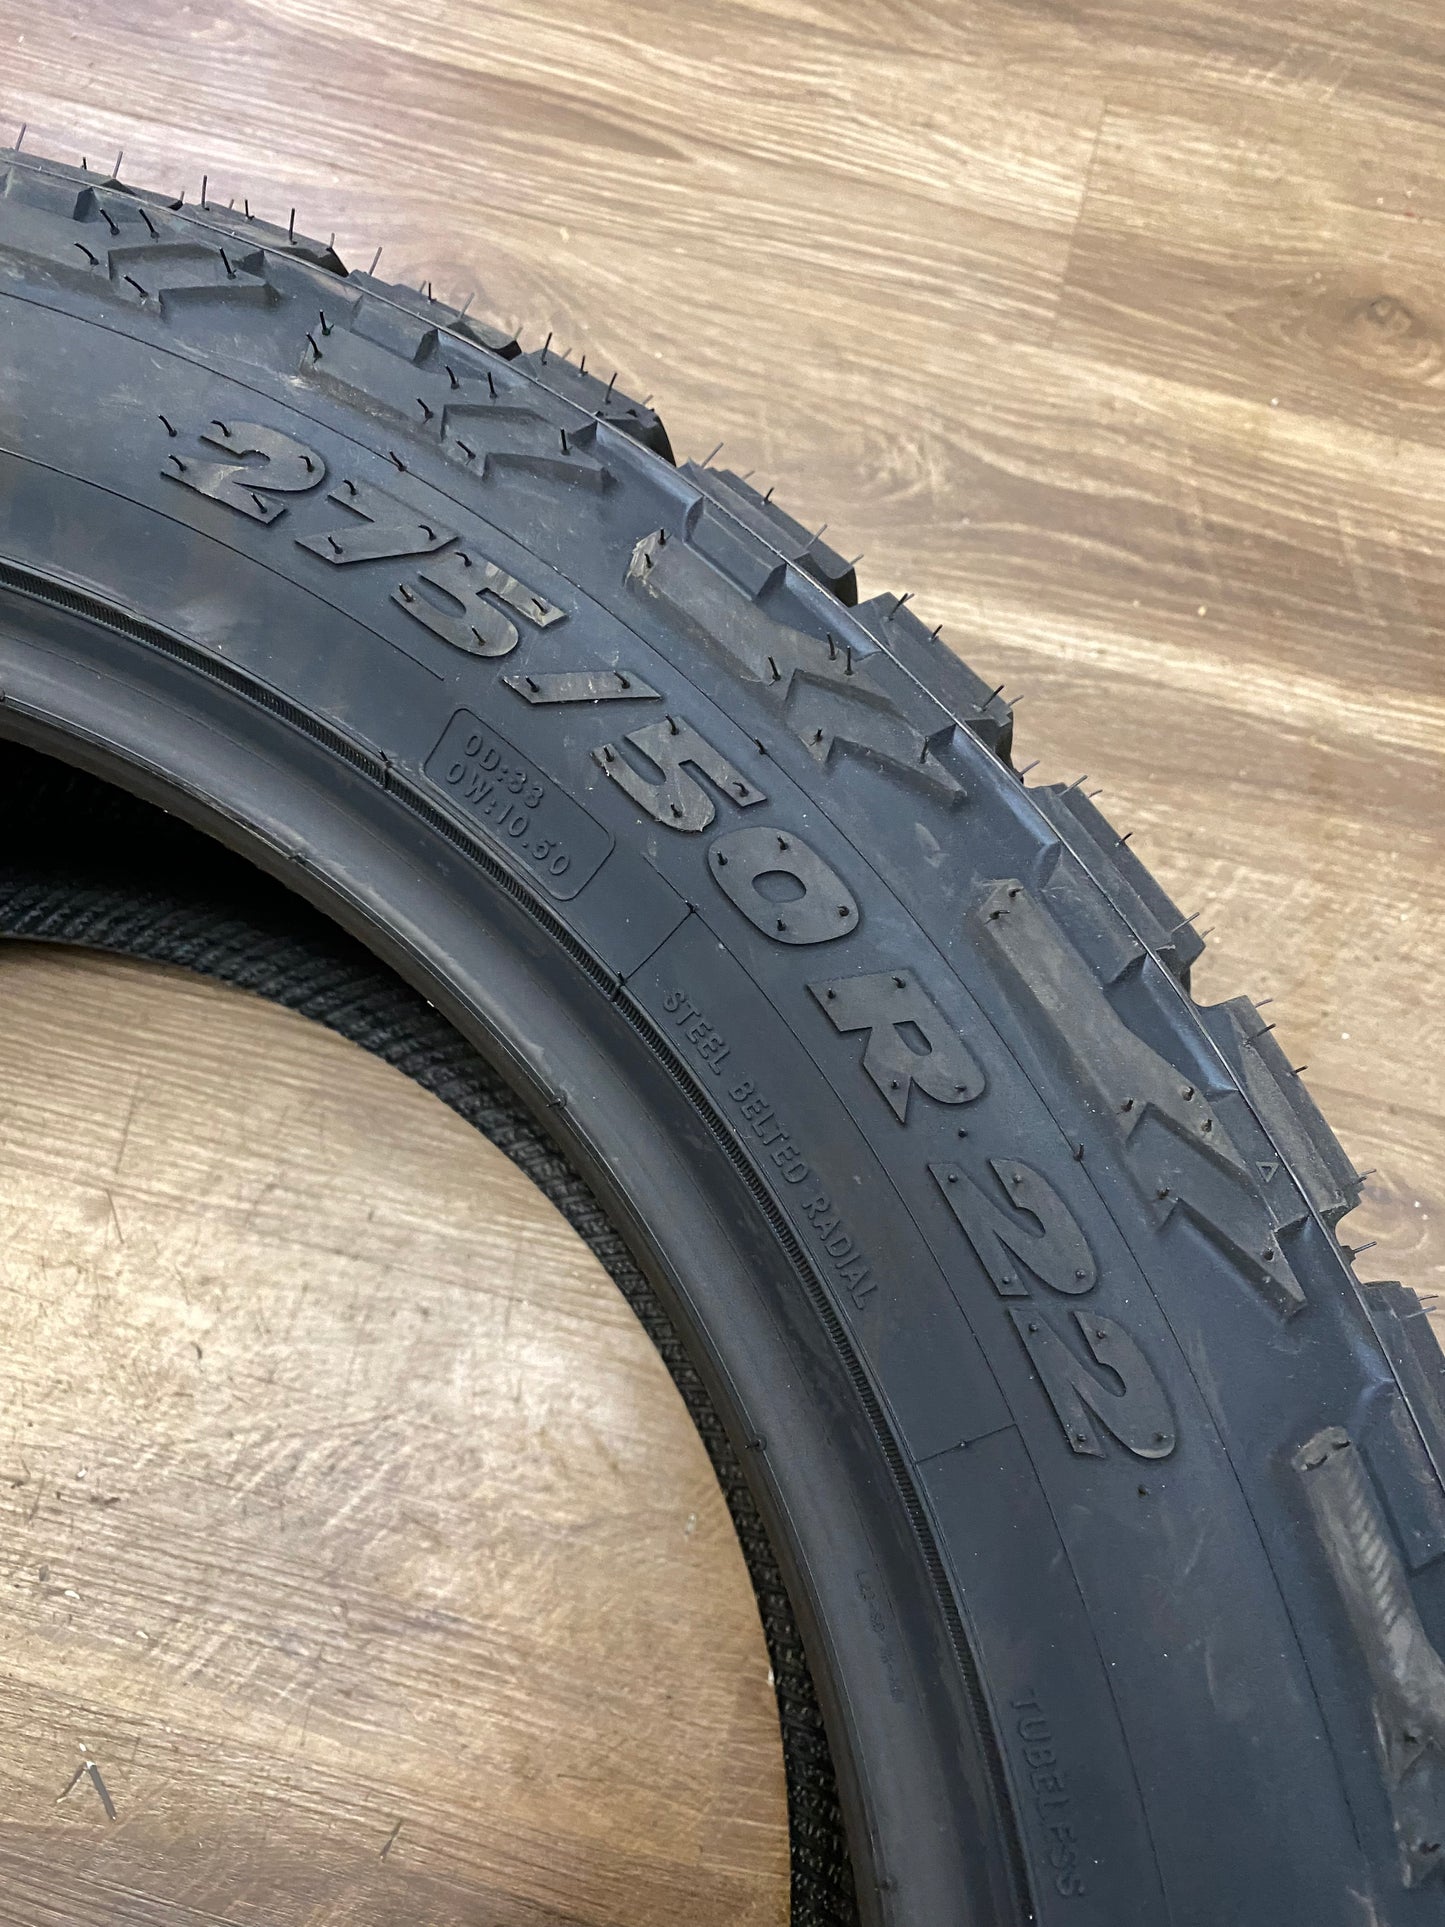 275/50/22 Toyo OPEN COUNTRY R/T TRAIL All Season Tires